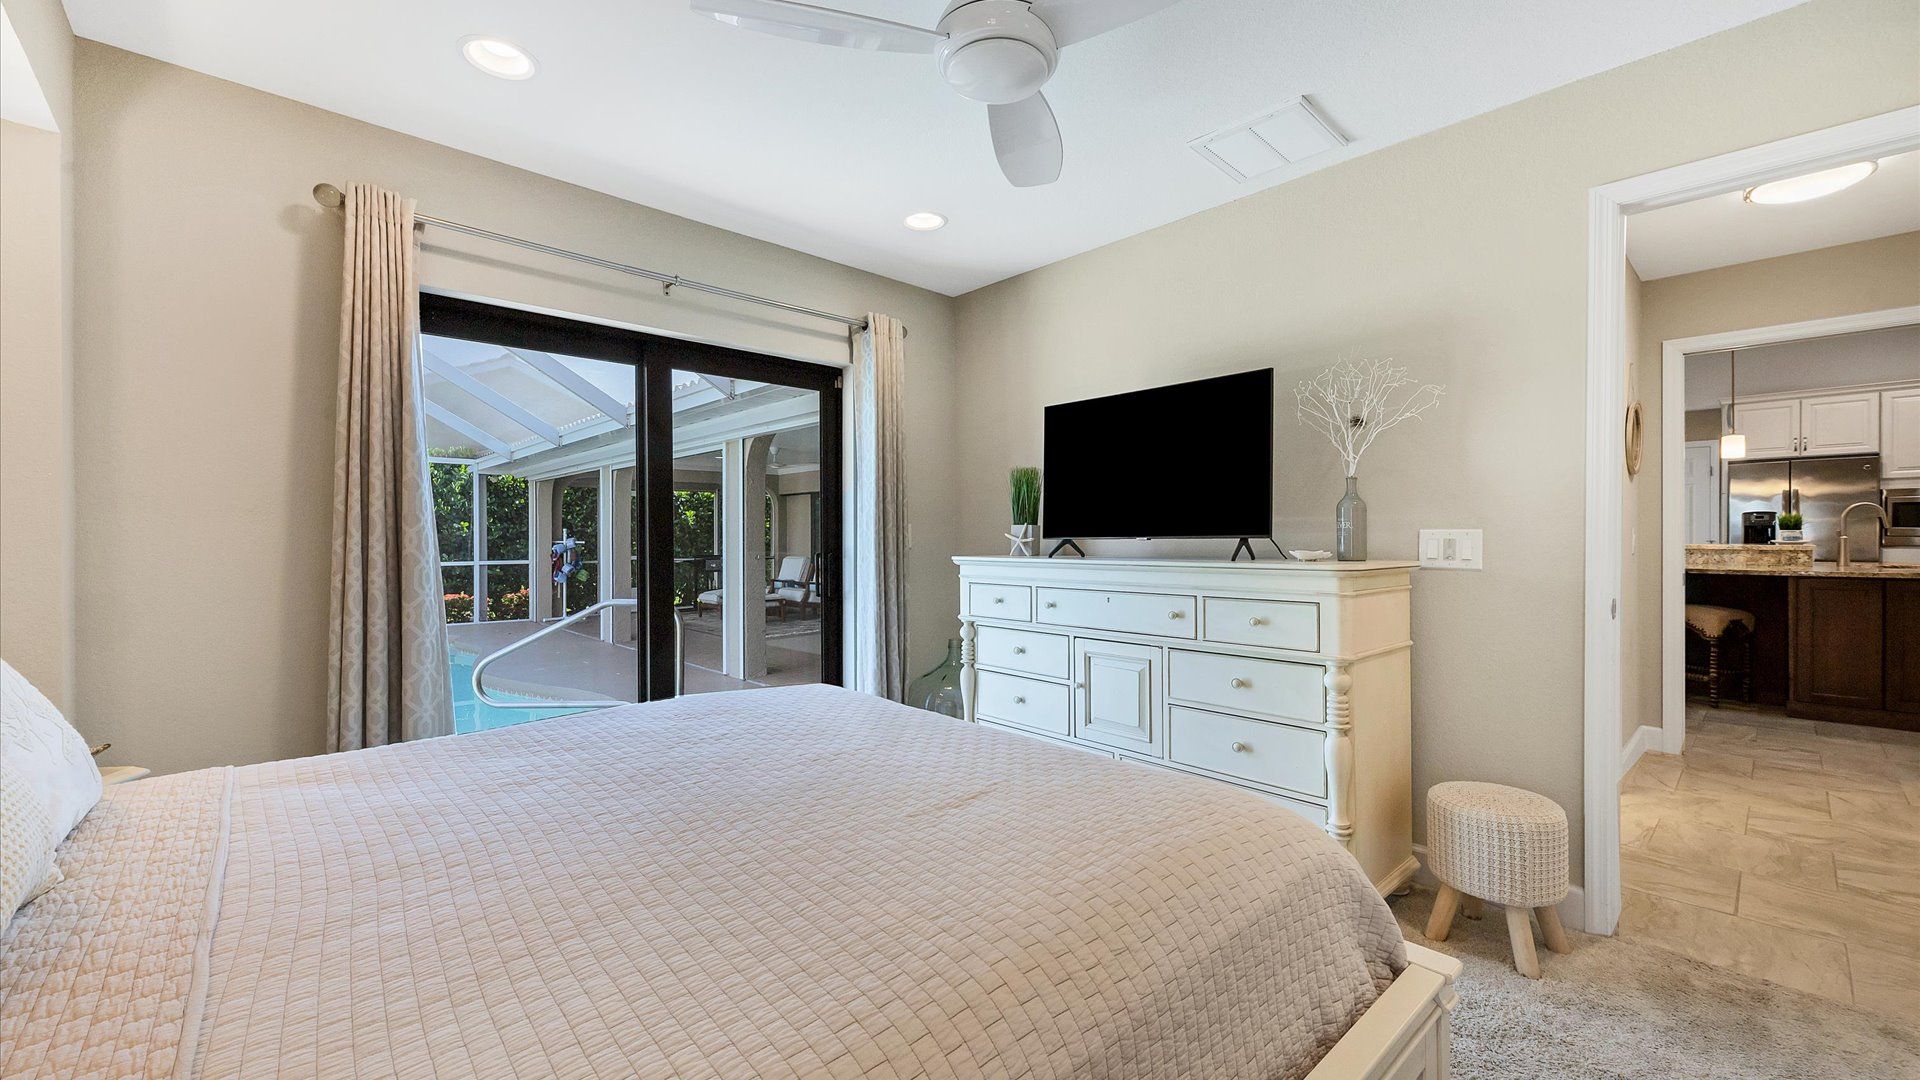 Queen guest bedroom with lanai access